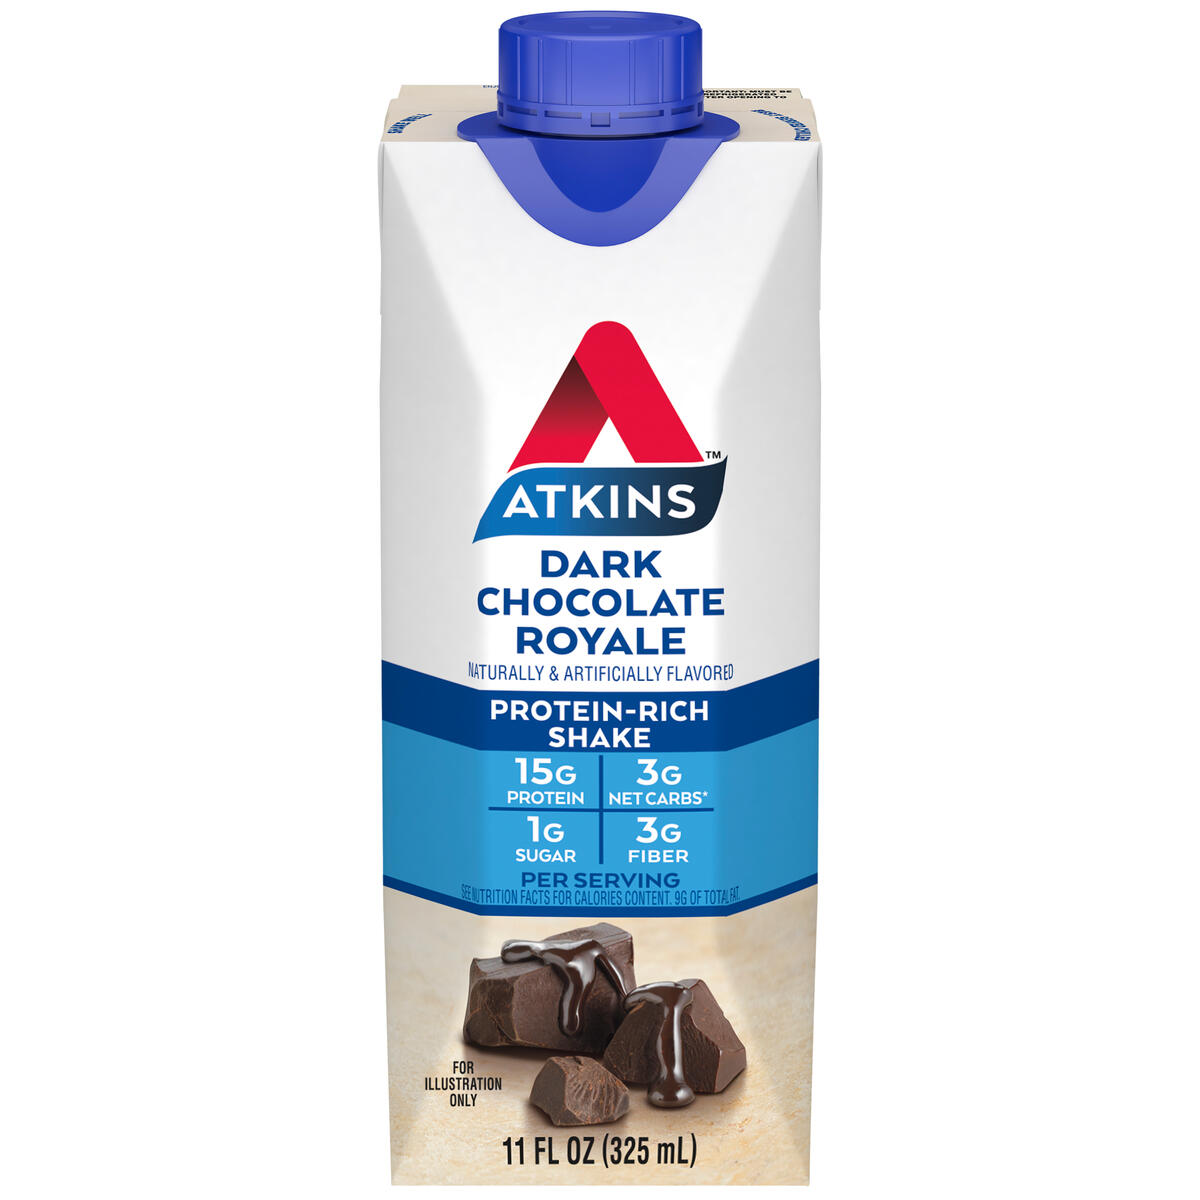 Atkins Dark Chocolate Royale Protein Shake, High Protein, Low Carb, Low Sugar, Keto Friendly, 12 Ct - image 3 of 9